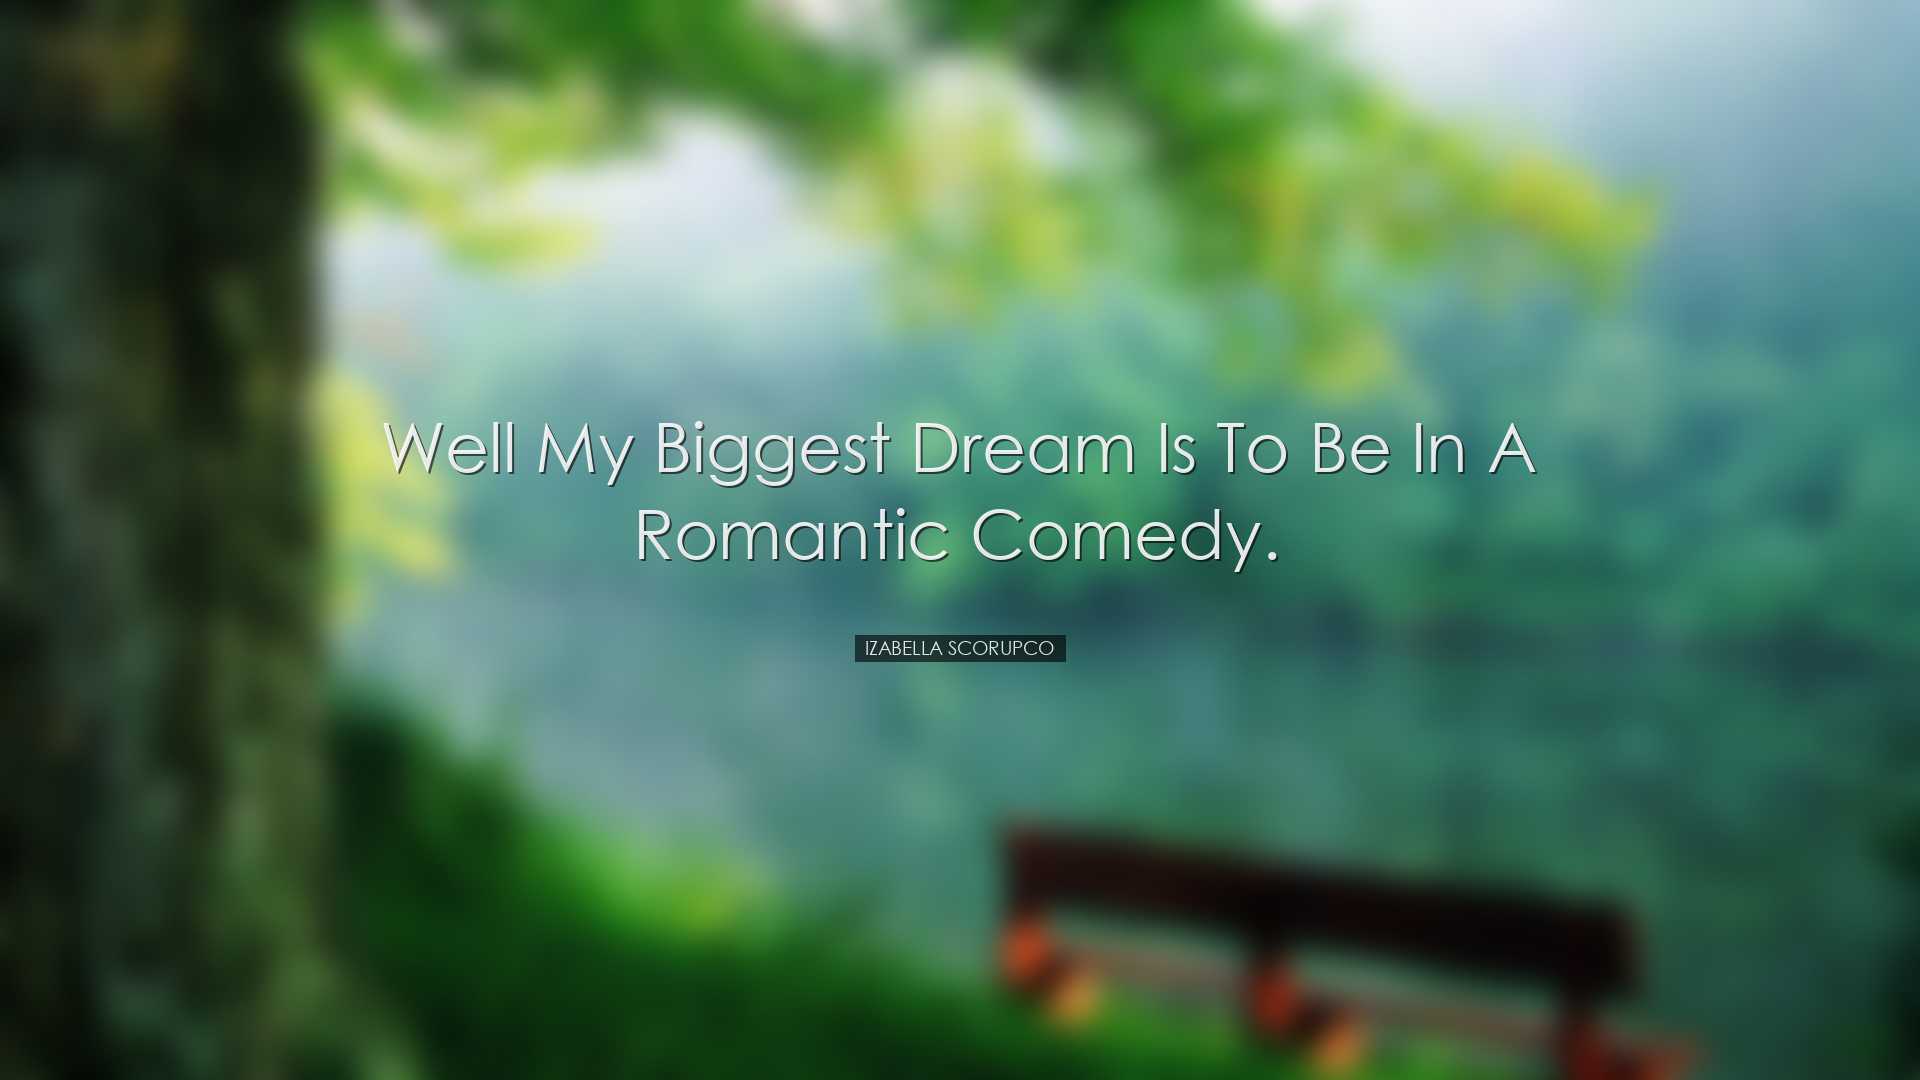 Well my biggest dream is to be in a romantic comedy. - Izabella Sc